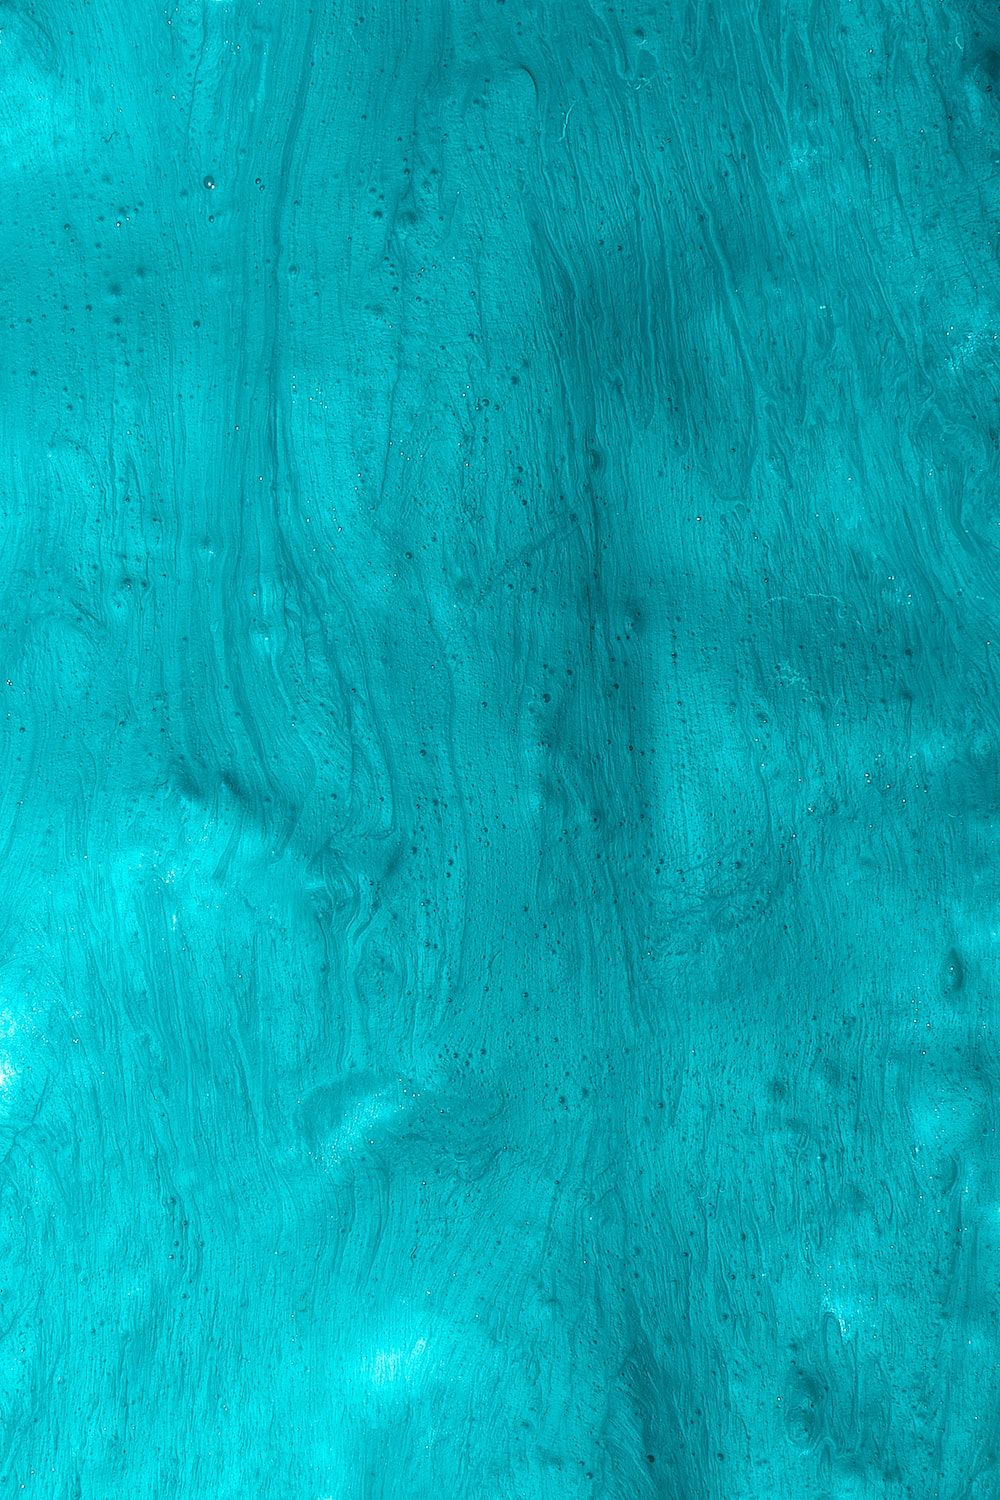 Turquoise Wallpaper: Free HD Download [HQ]